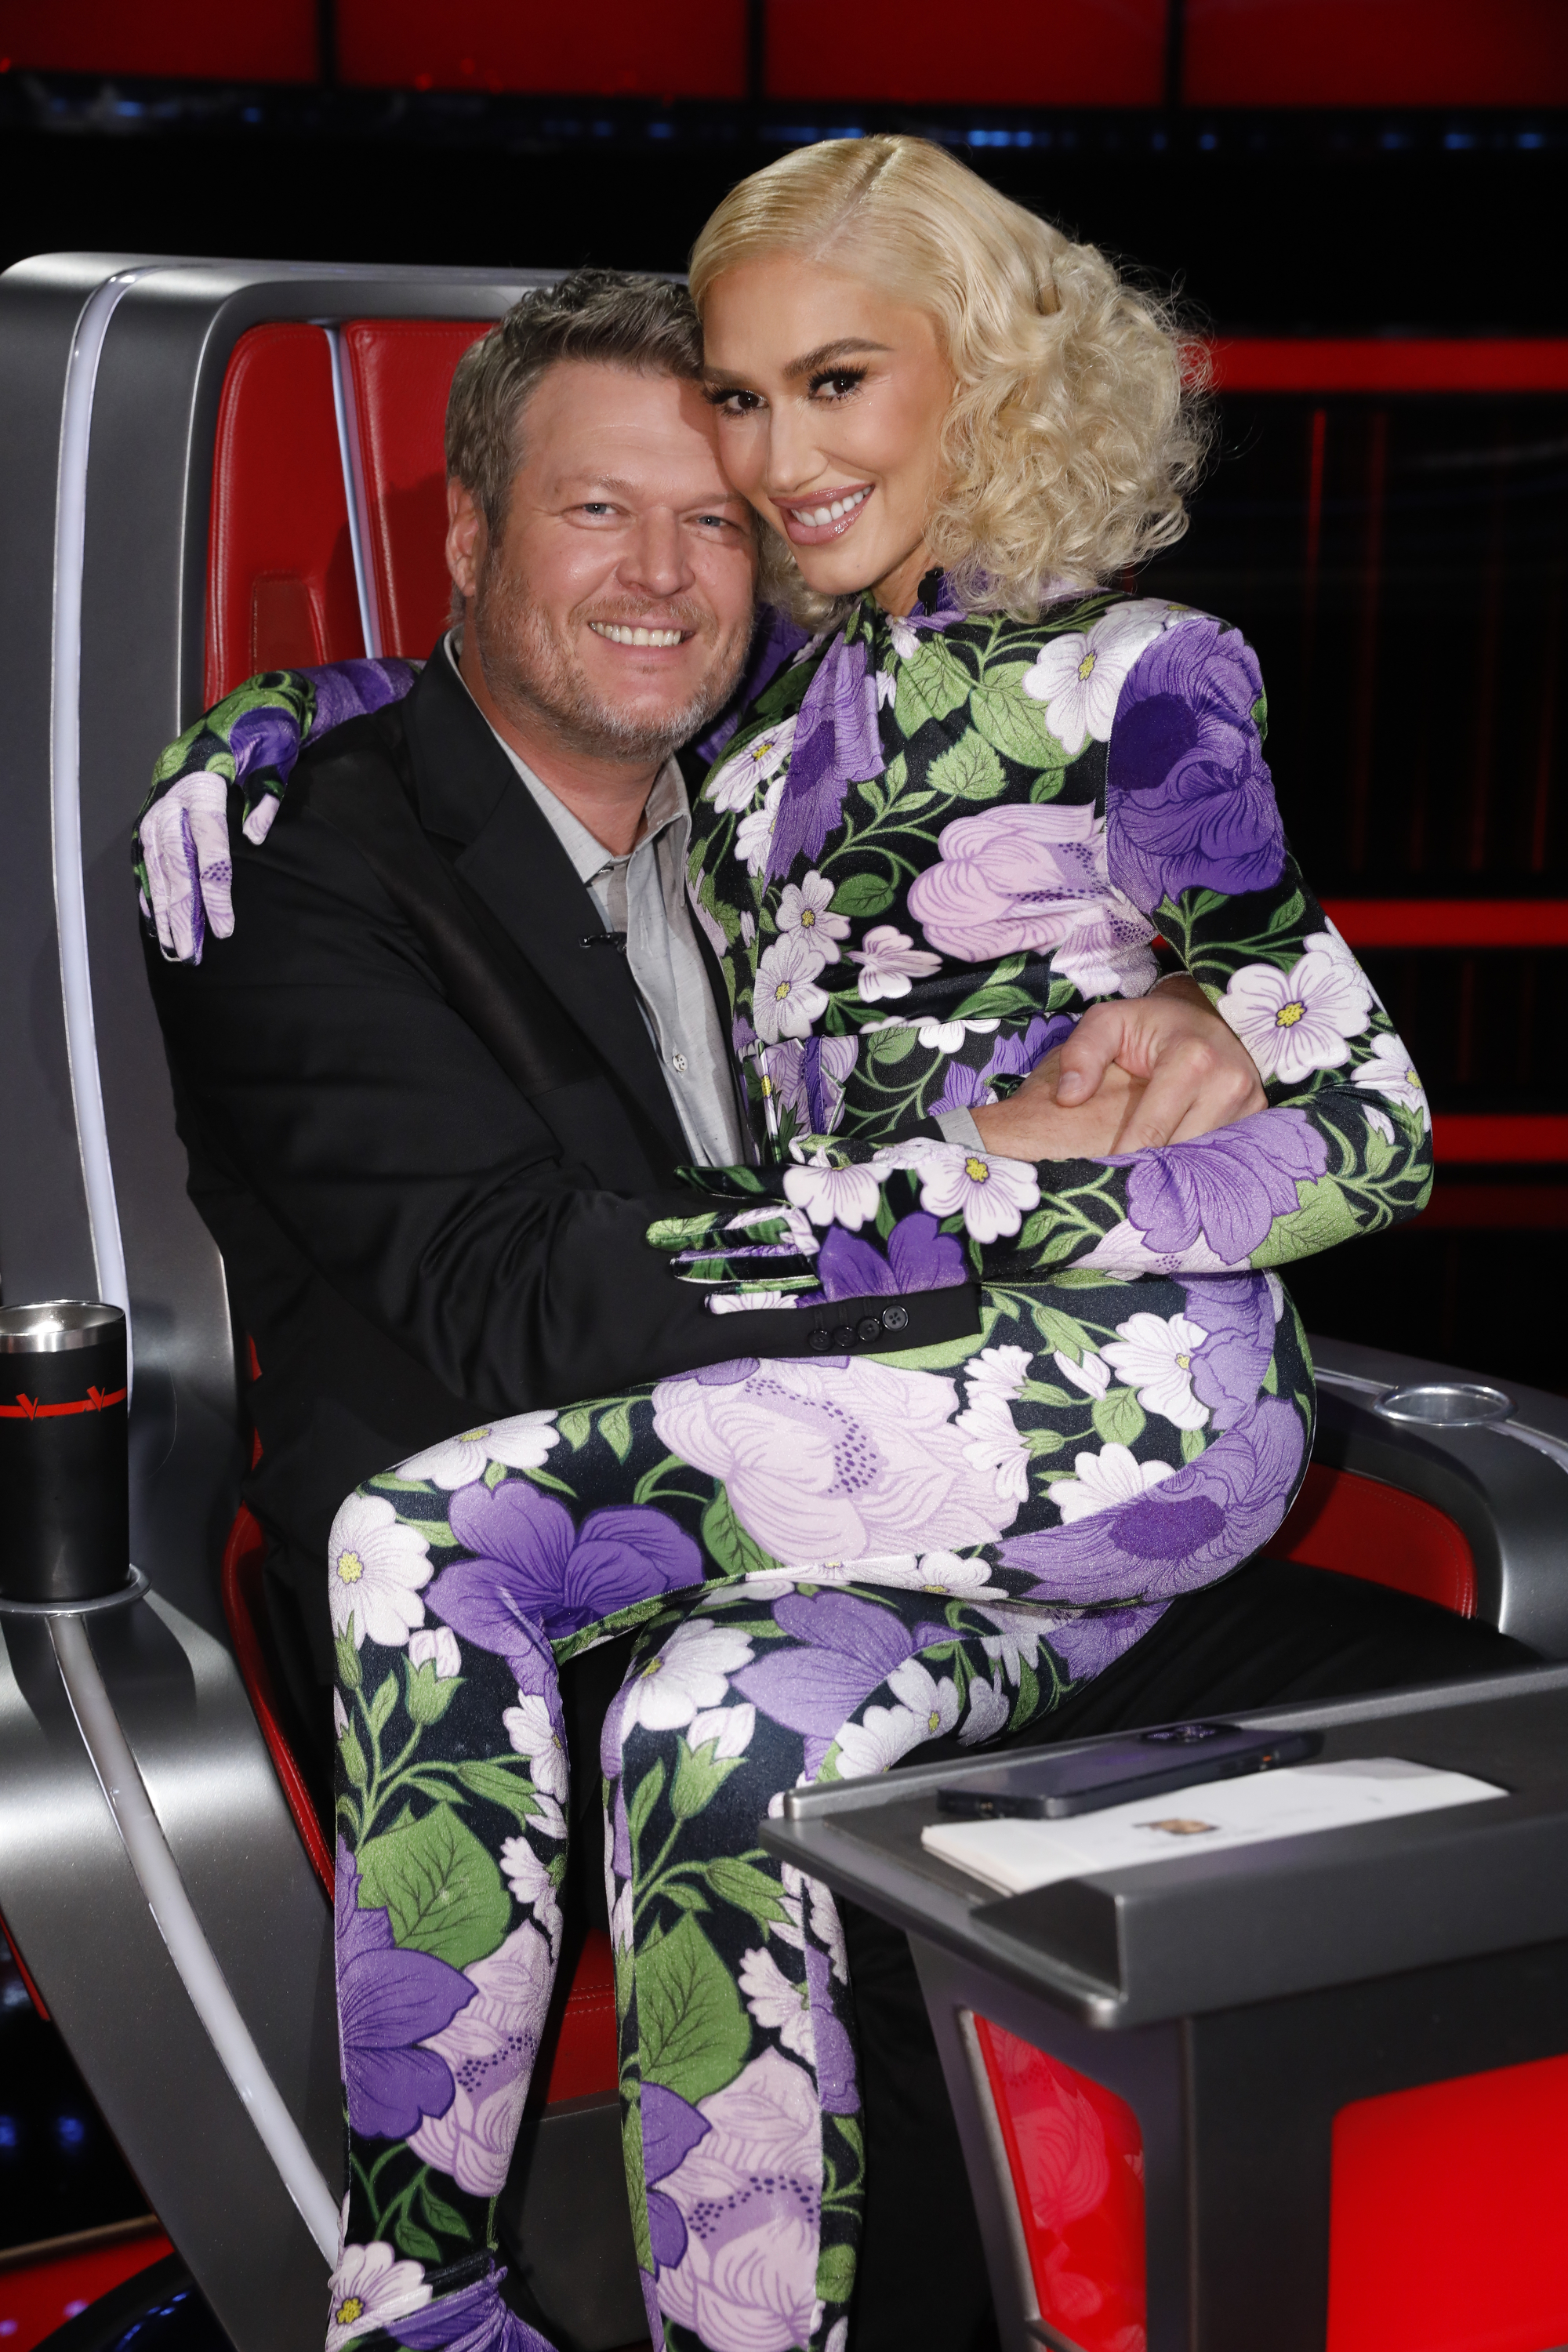 Gwen's thriving business comes as she's sparked rumors she may have split from her husband, Blake Shelton